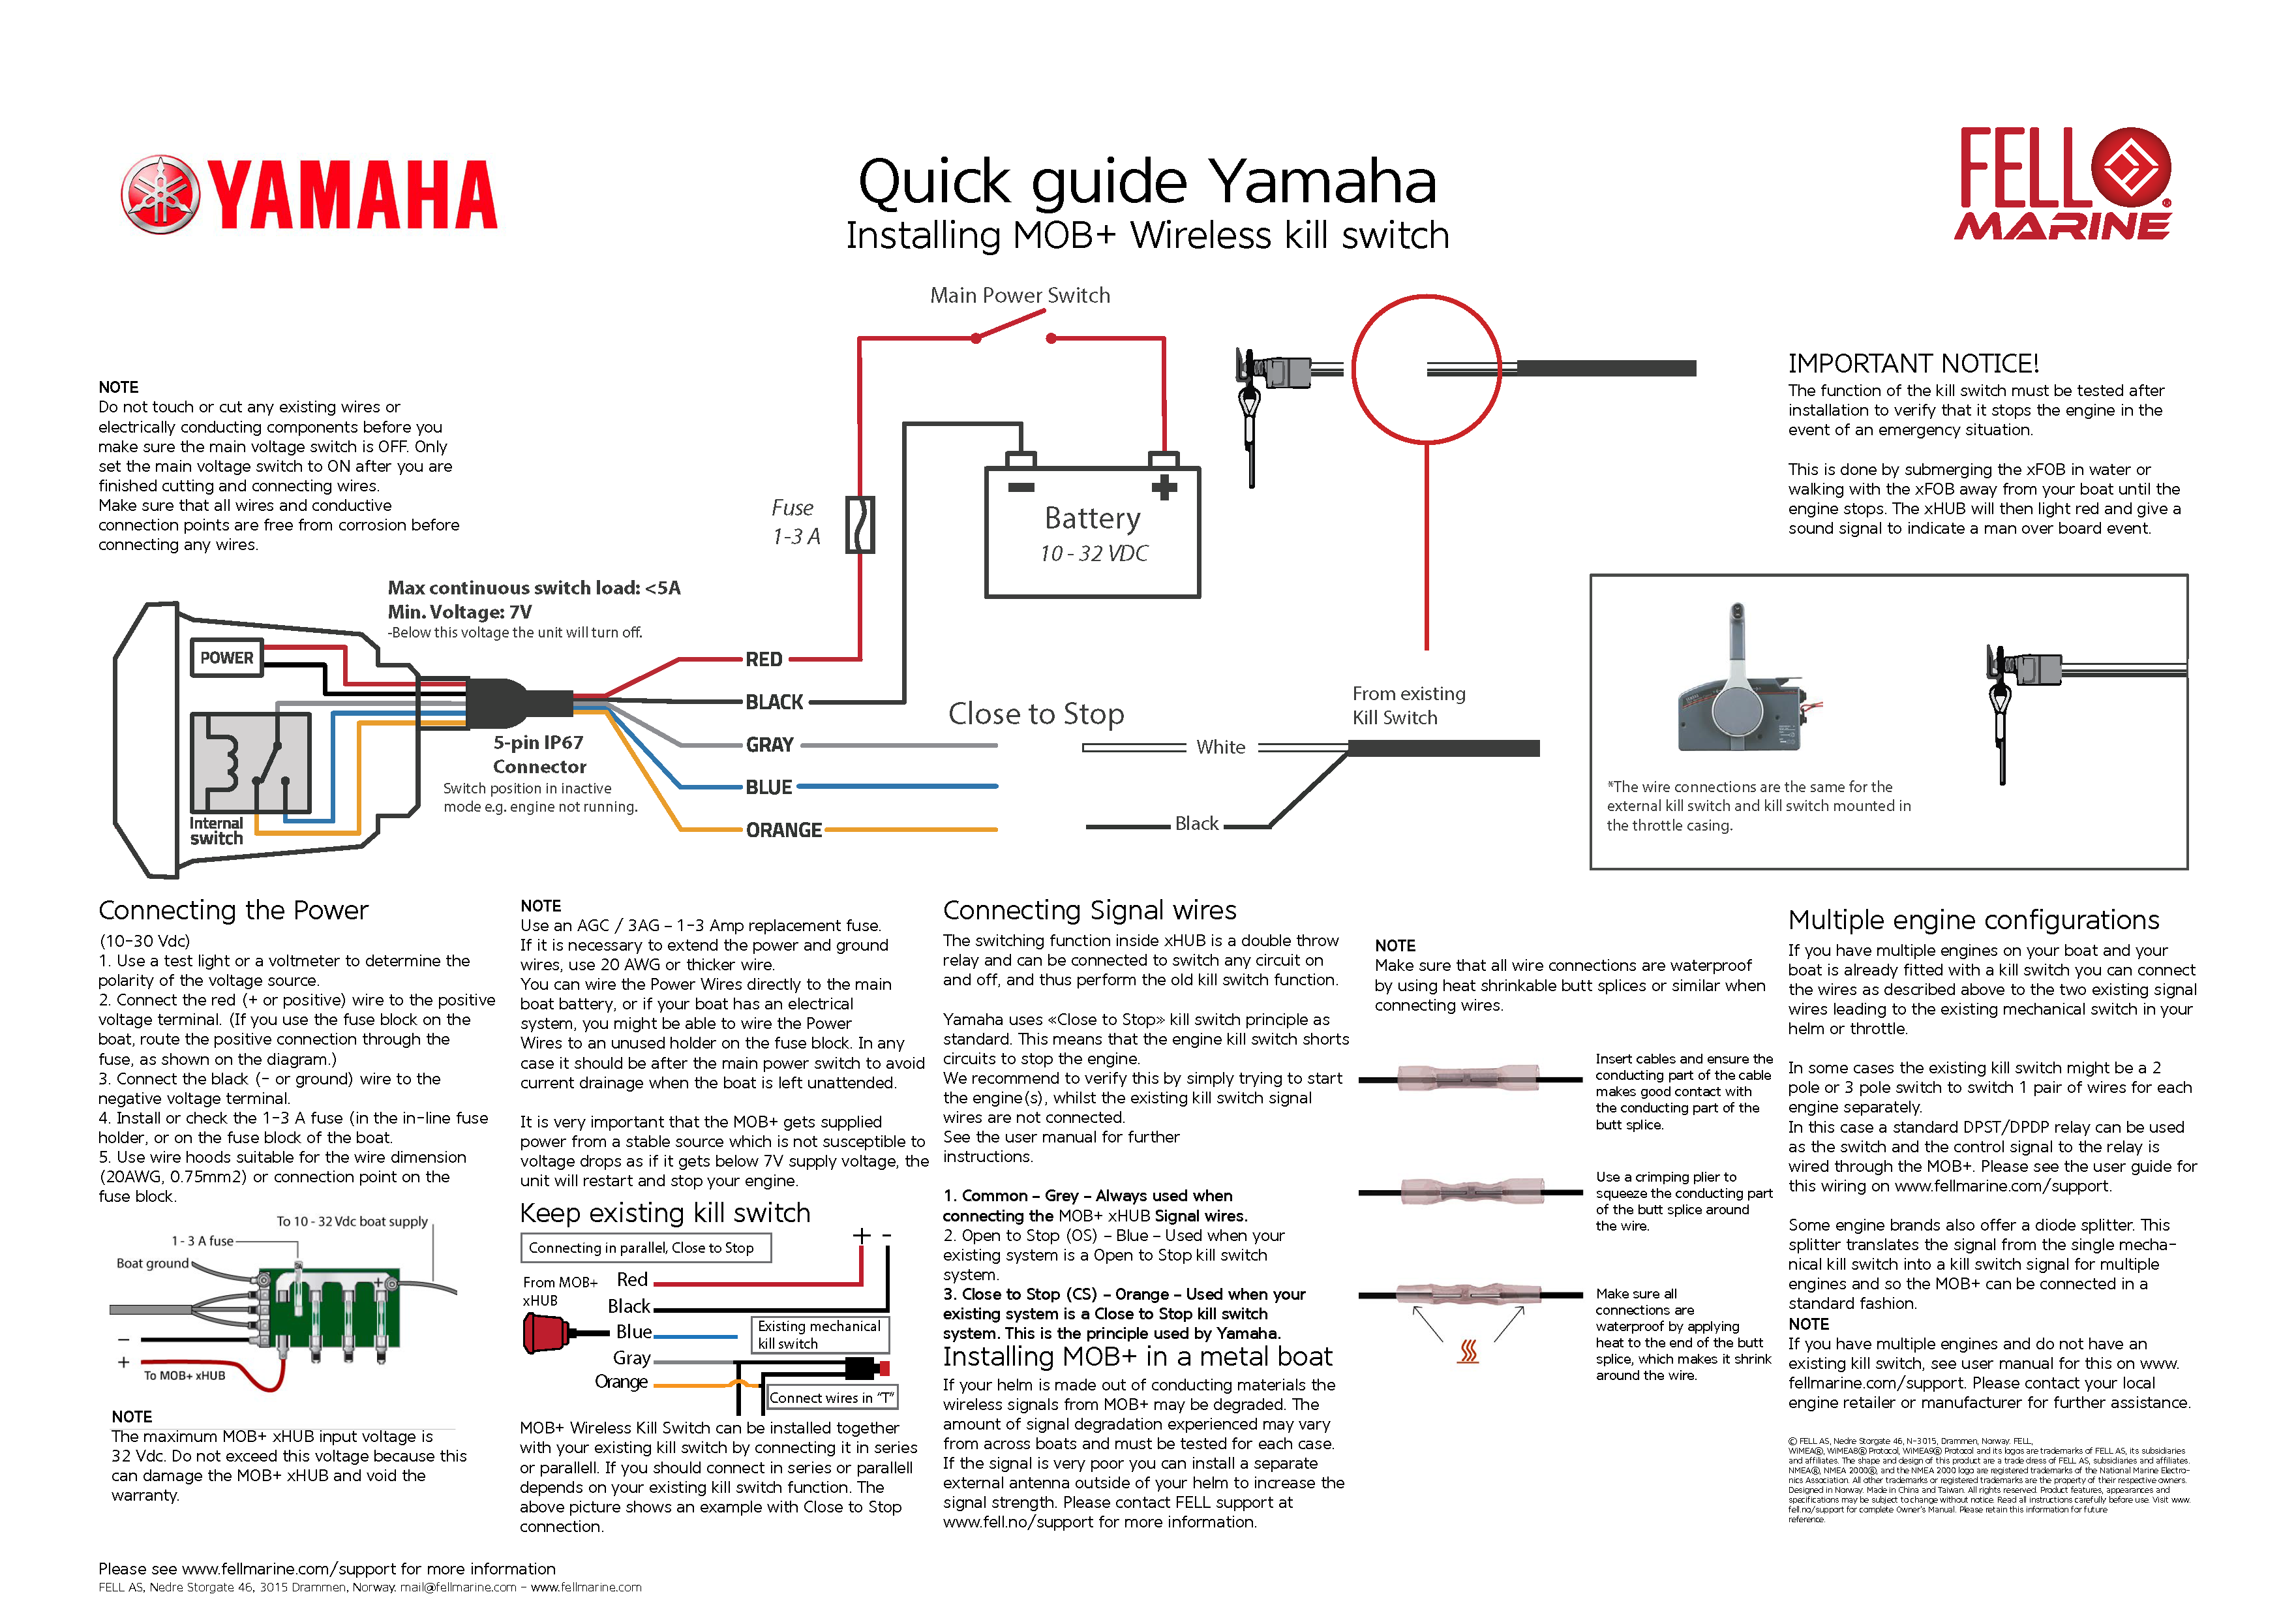 Yamaha_QuickGuide.png